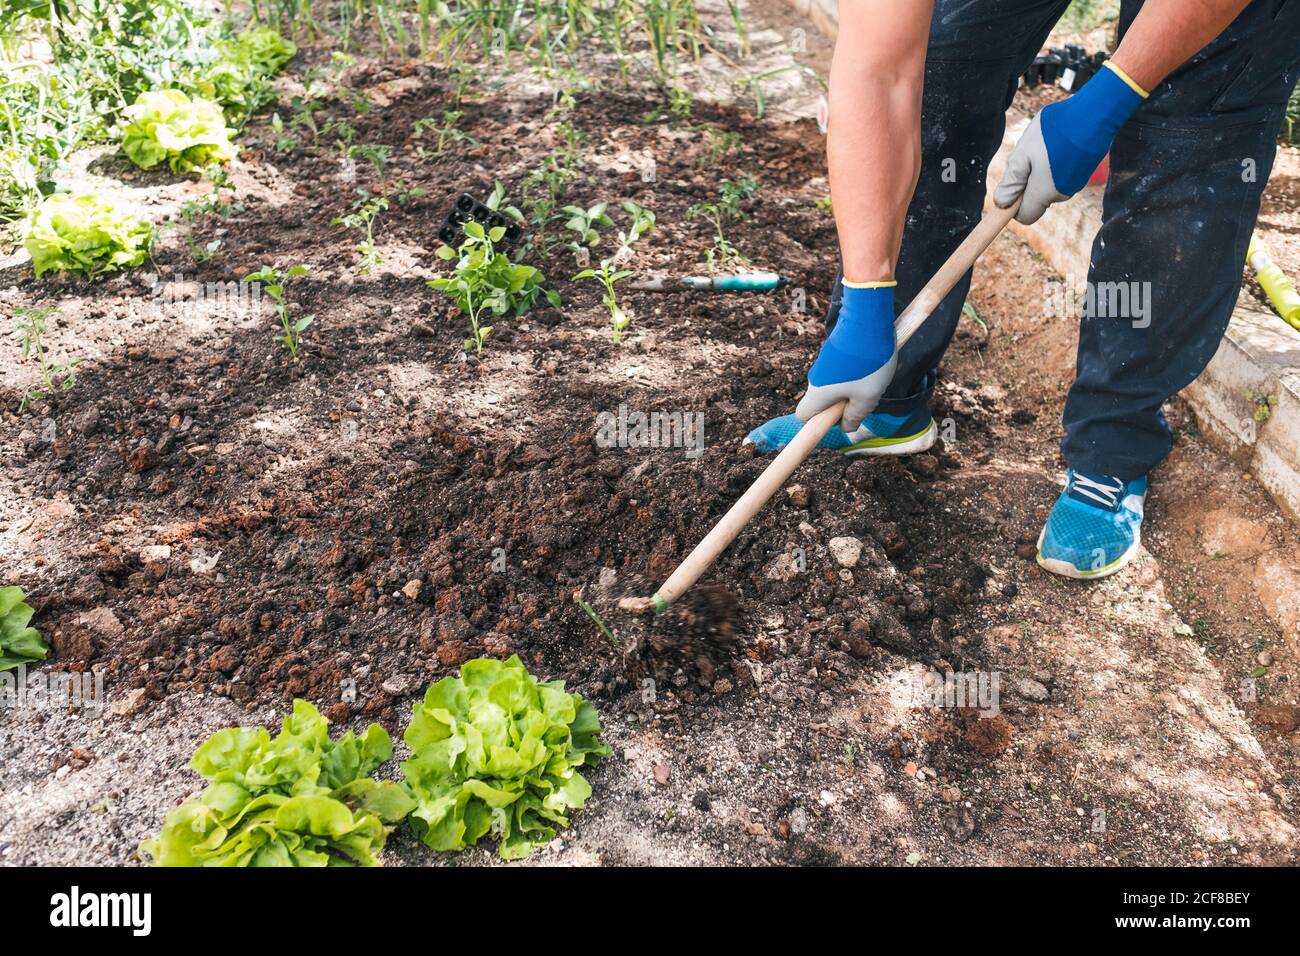 Full body side view of mature male gardener in casual wear and gloves using gardening hoe for cultivating soil around green plants while working in garden in sunny day Stock Photo